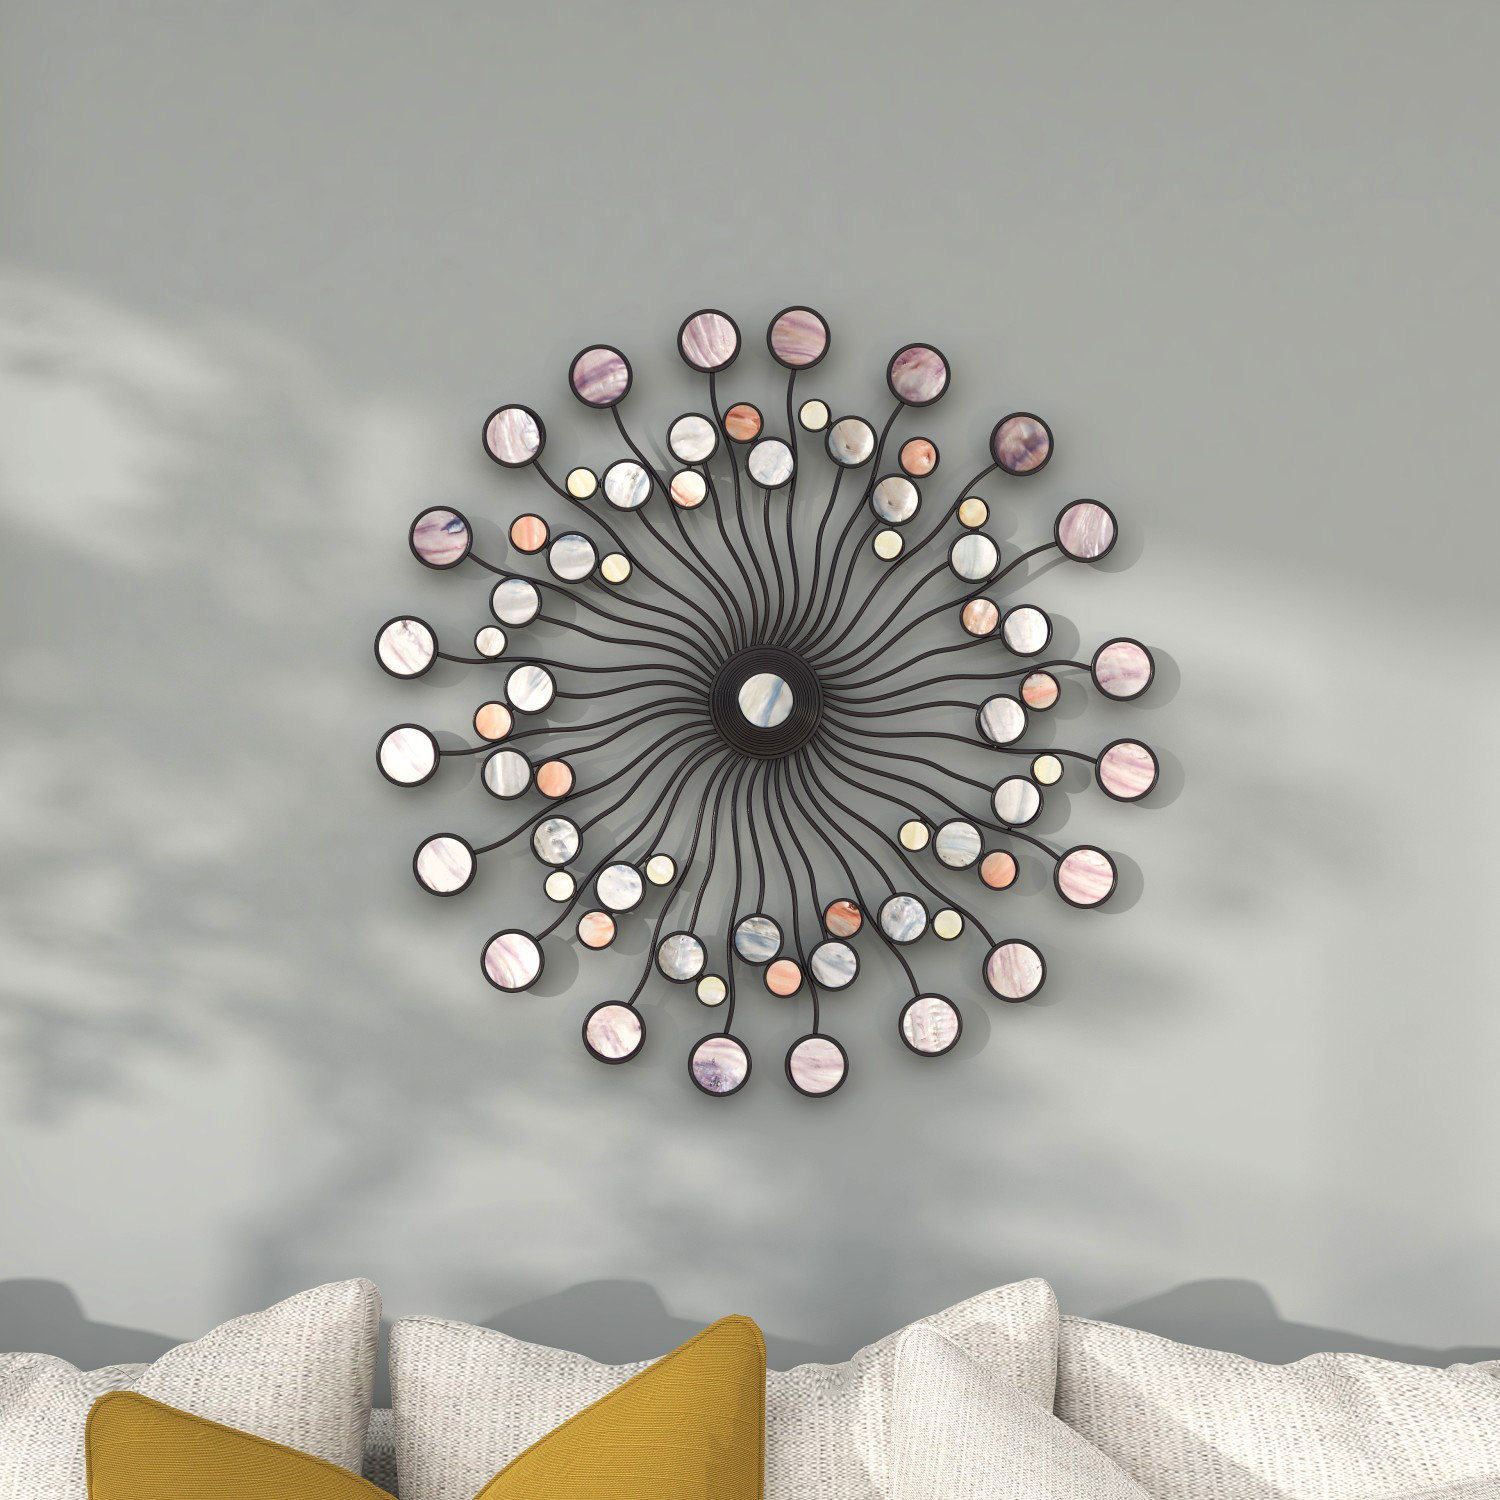 Ivy Bronx Modern Multi Colored Metal Sunburst Wall Decor with Marble ...